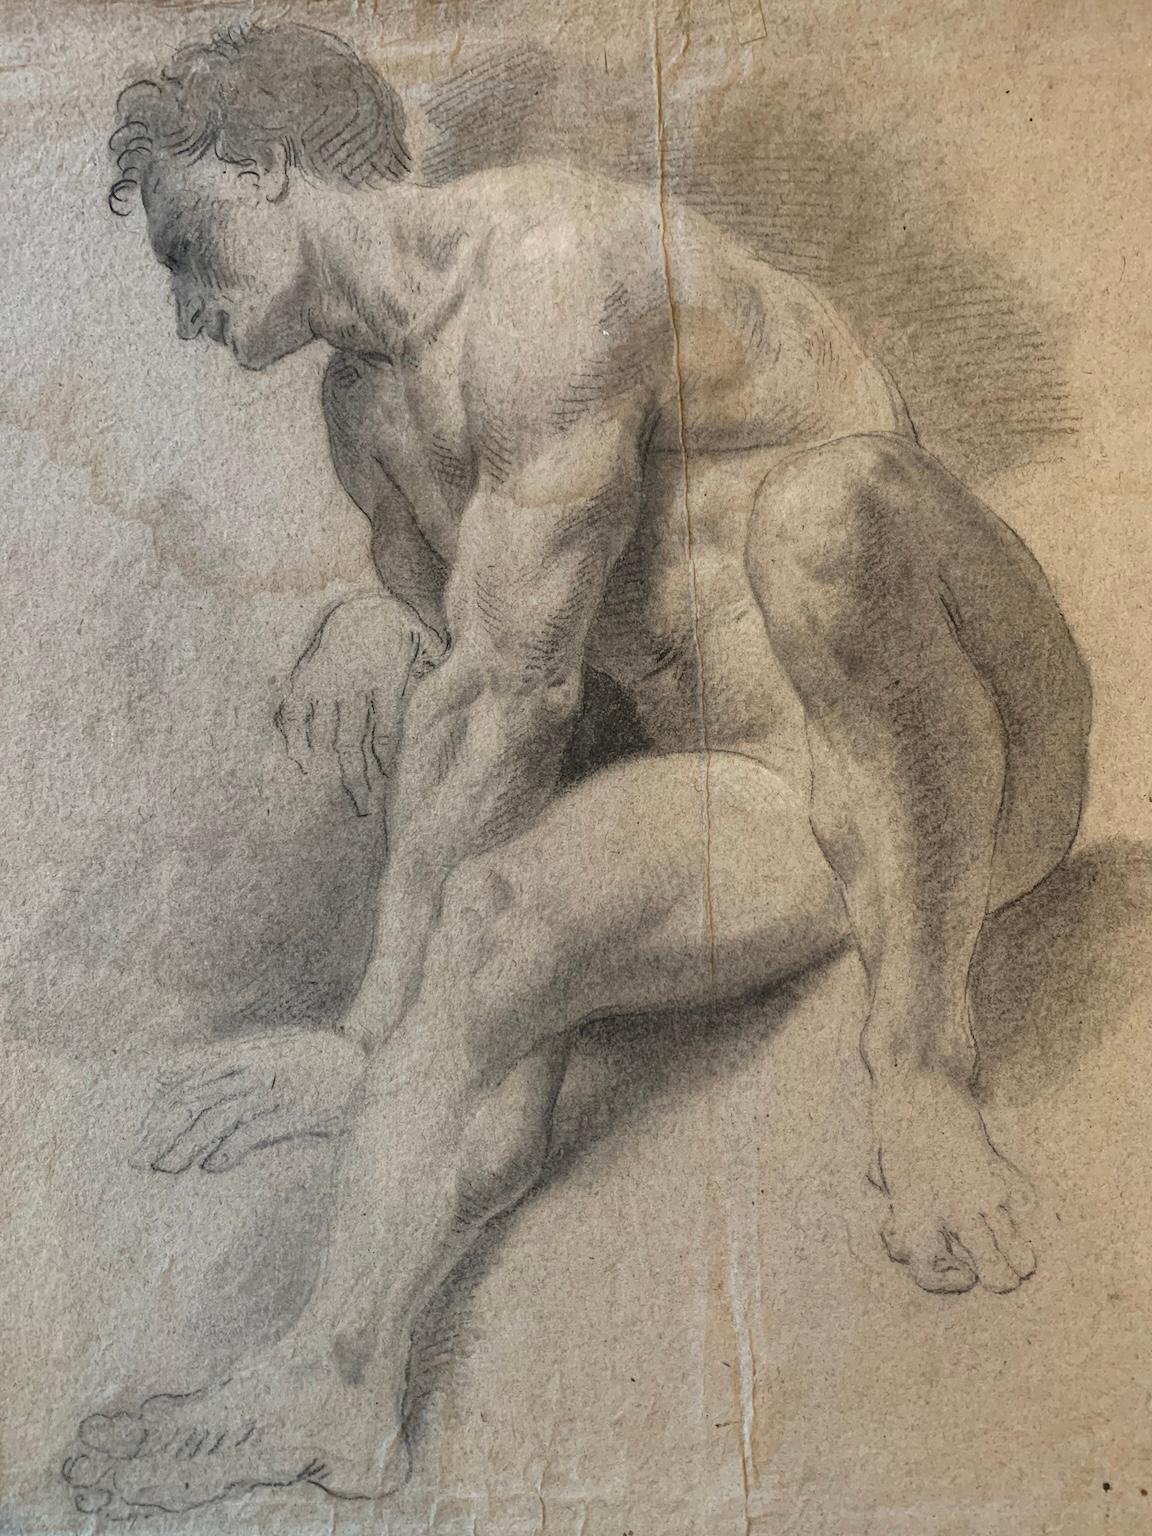 Academy of seated nude of 19th century Italian school - Other Art Style Art by Unknown